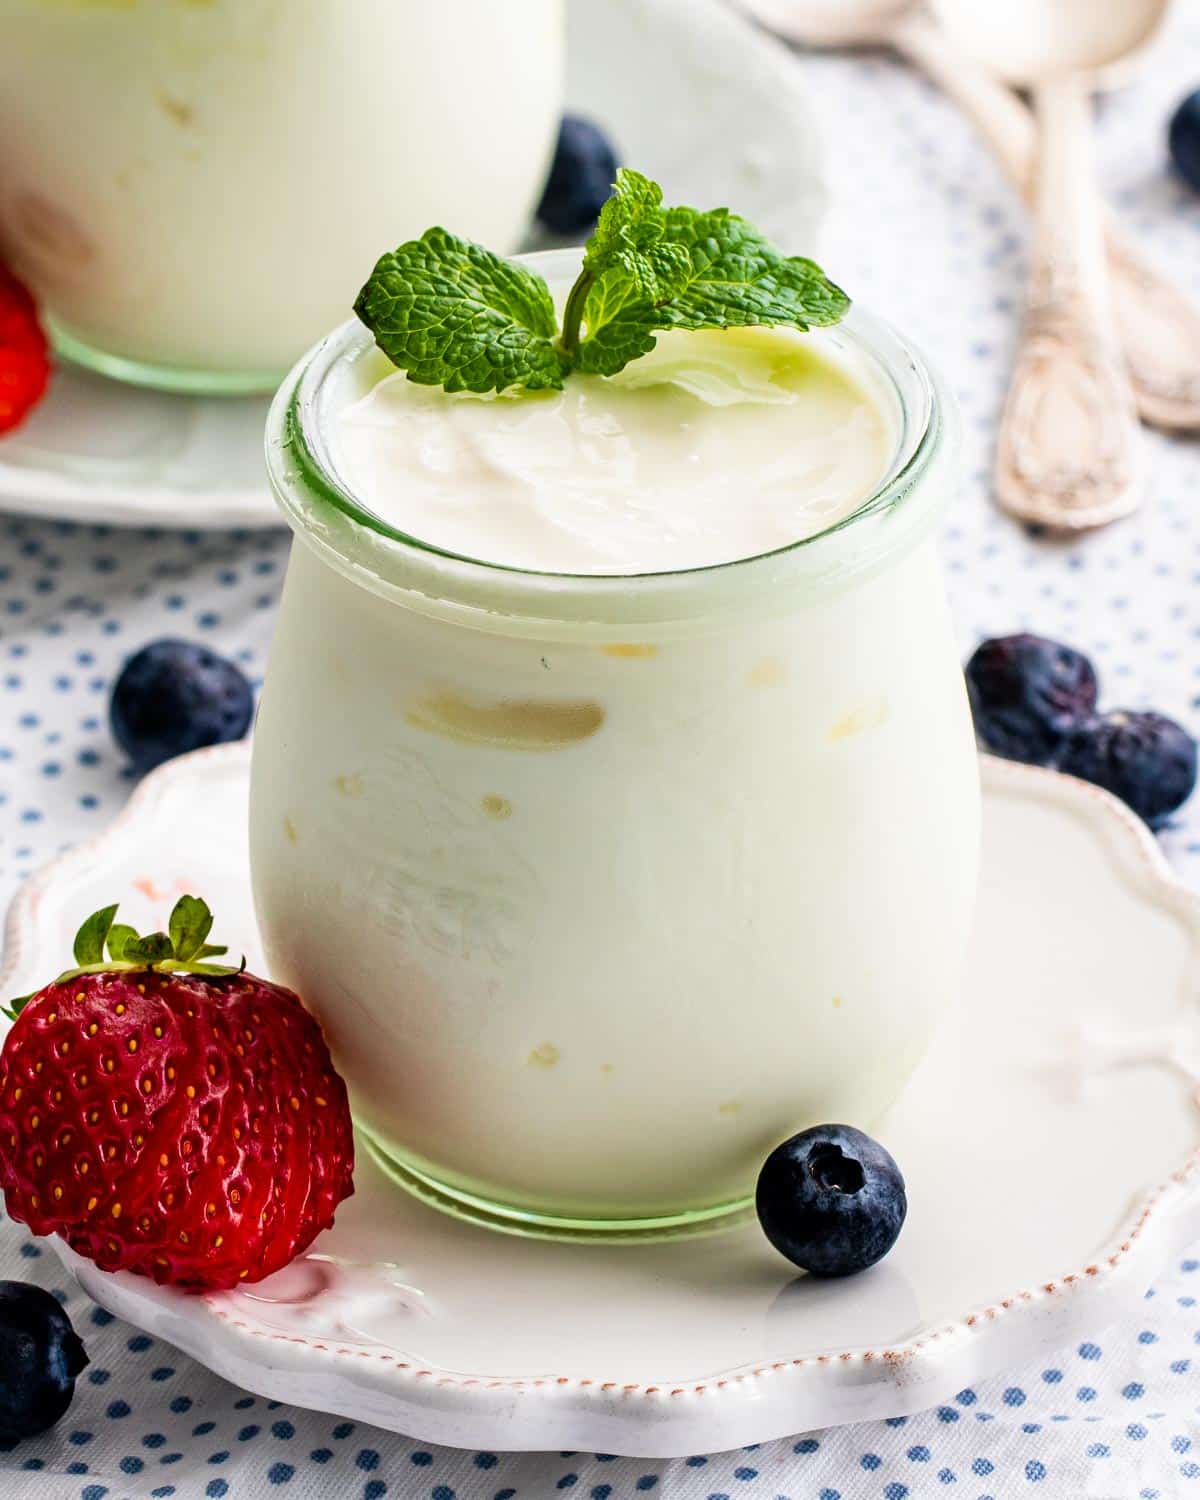 yogurt in a serving jar garnished with mint and berries.